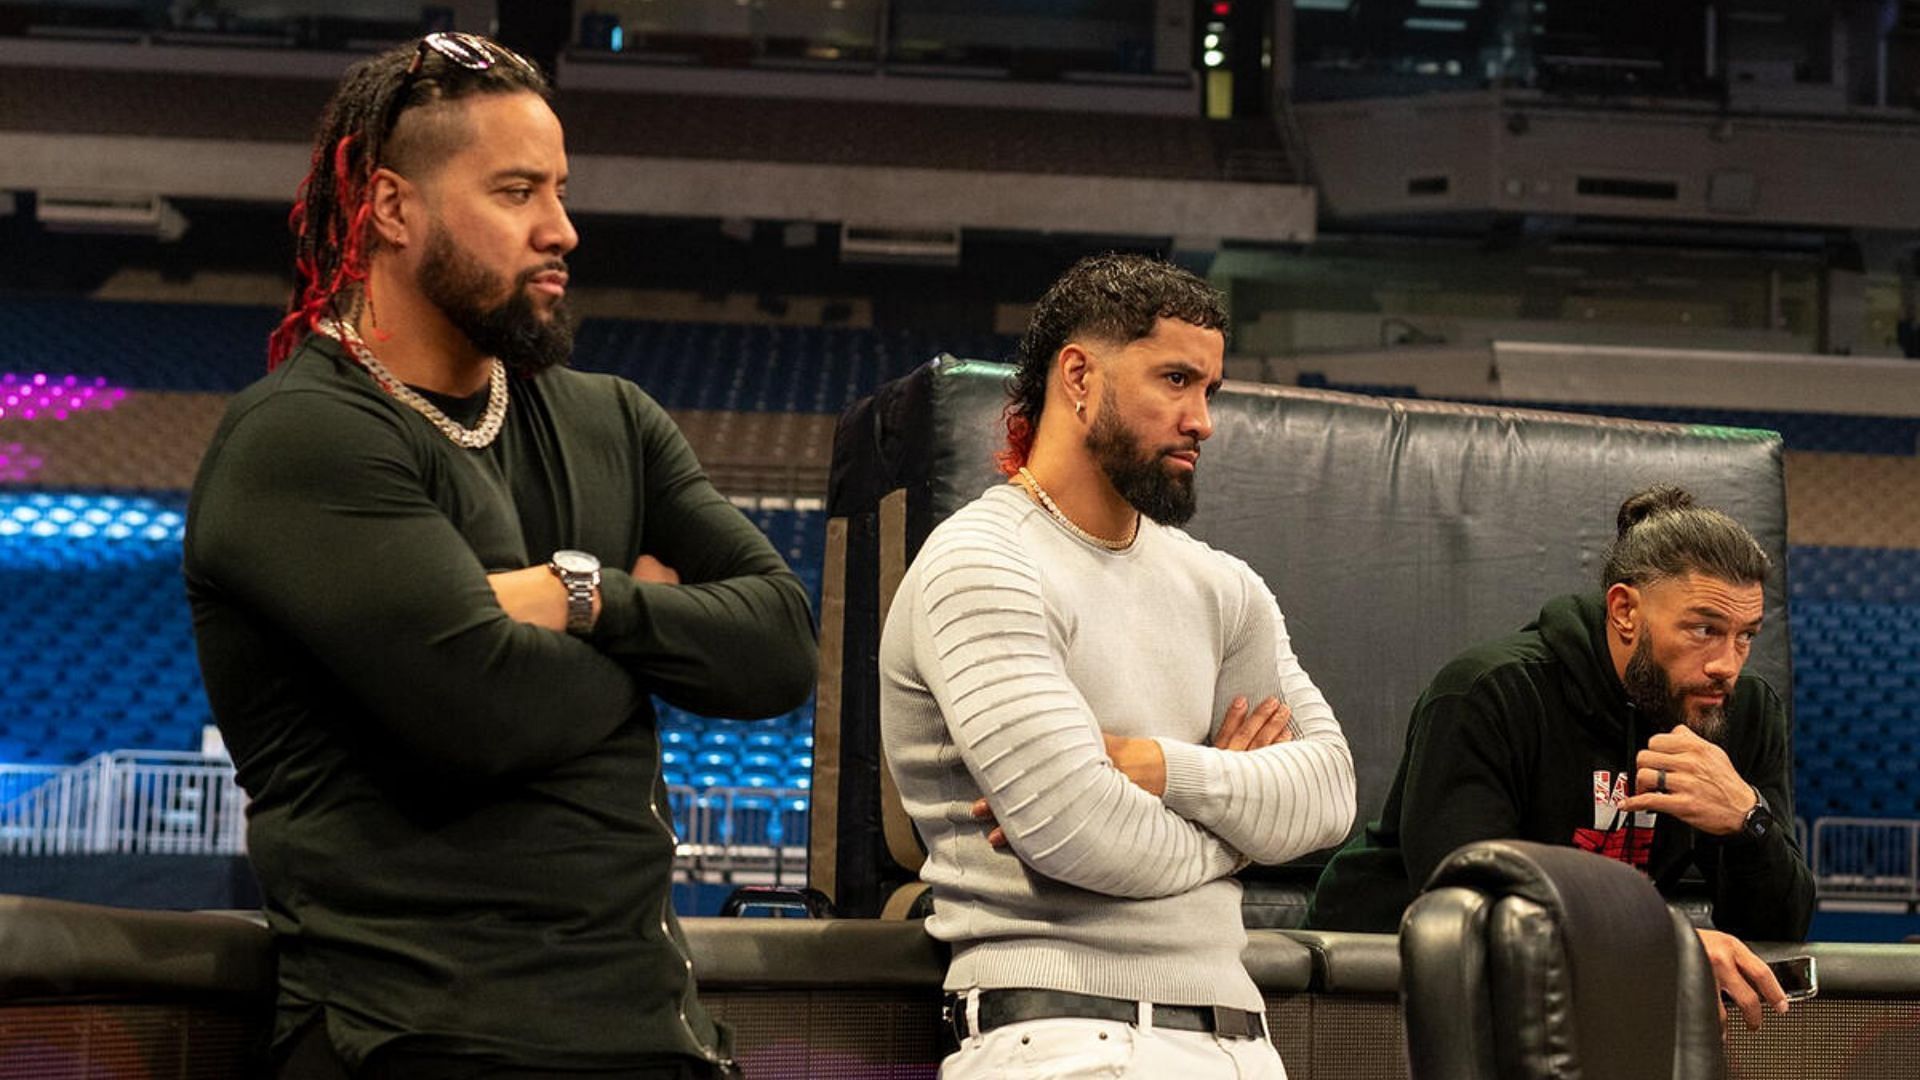 From left to right: Jimmy Uso, Jey Uso and Roman Reigns (Credit: WWE)